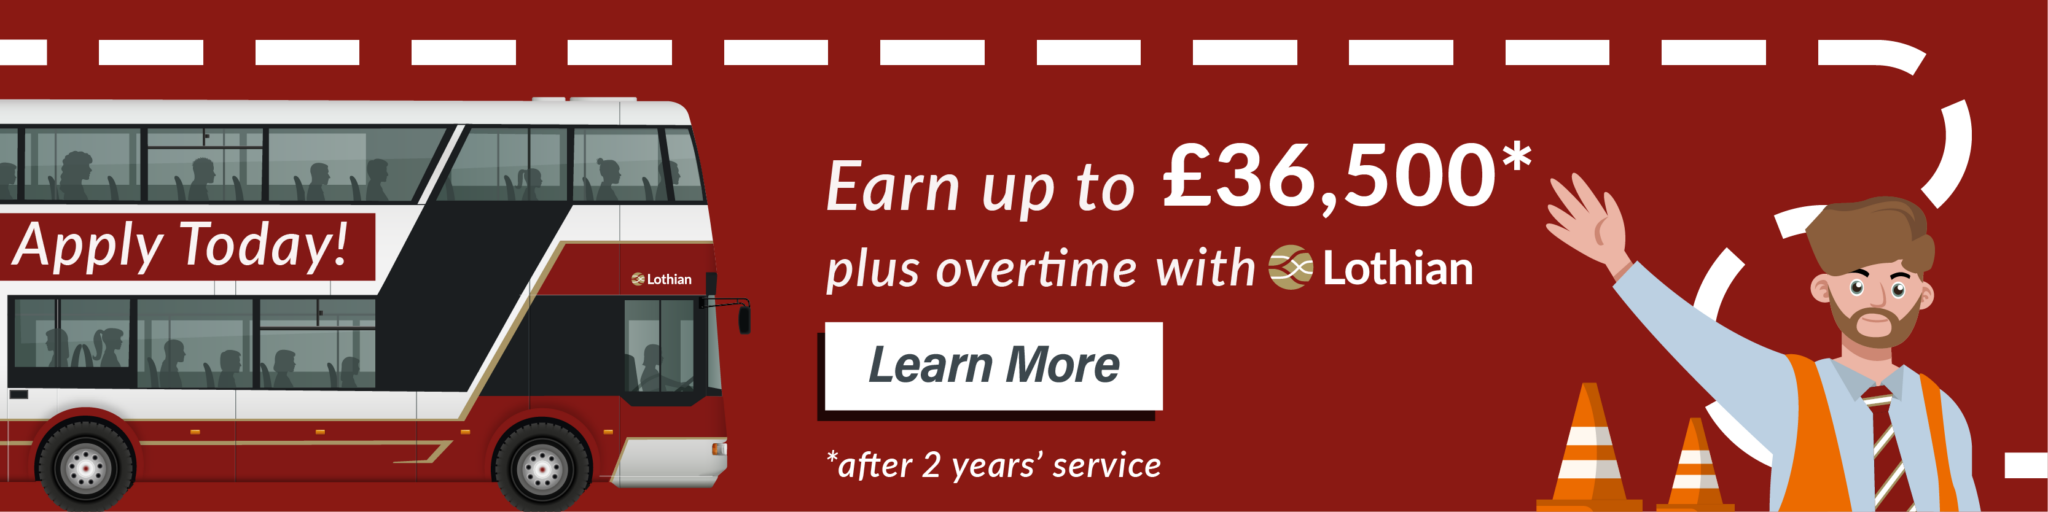 Earn up to £36,500* a year plus overtime with Lothian. Learn more. *after two years' service